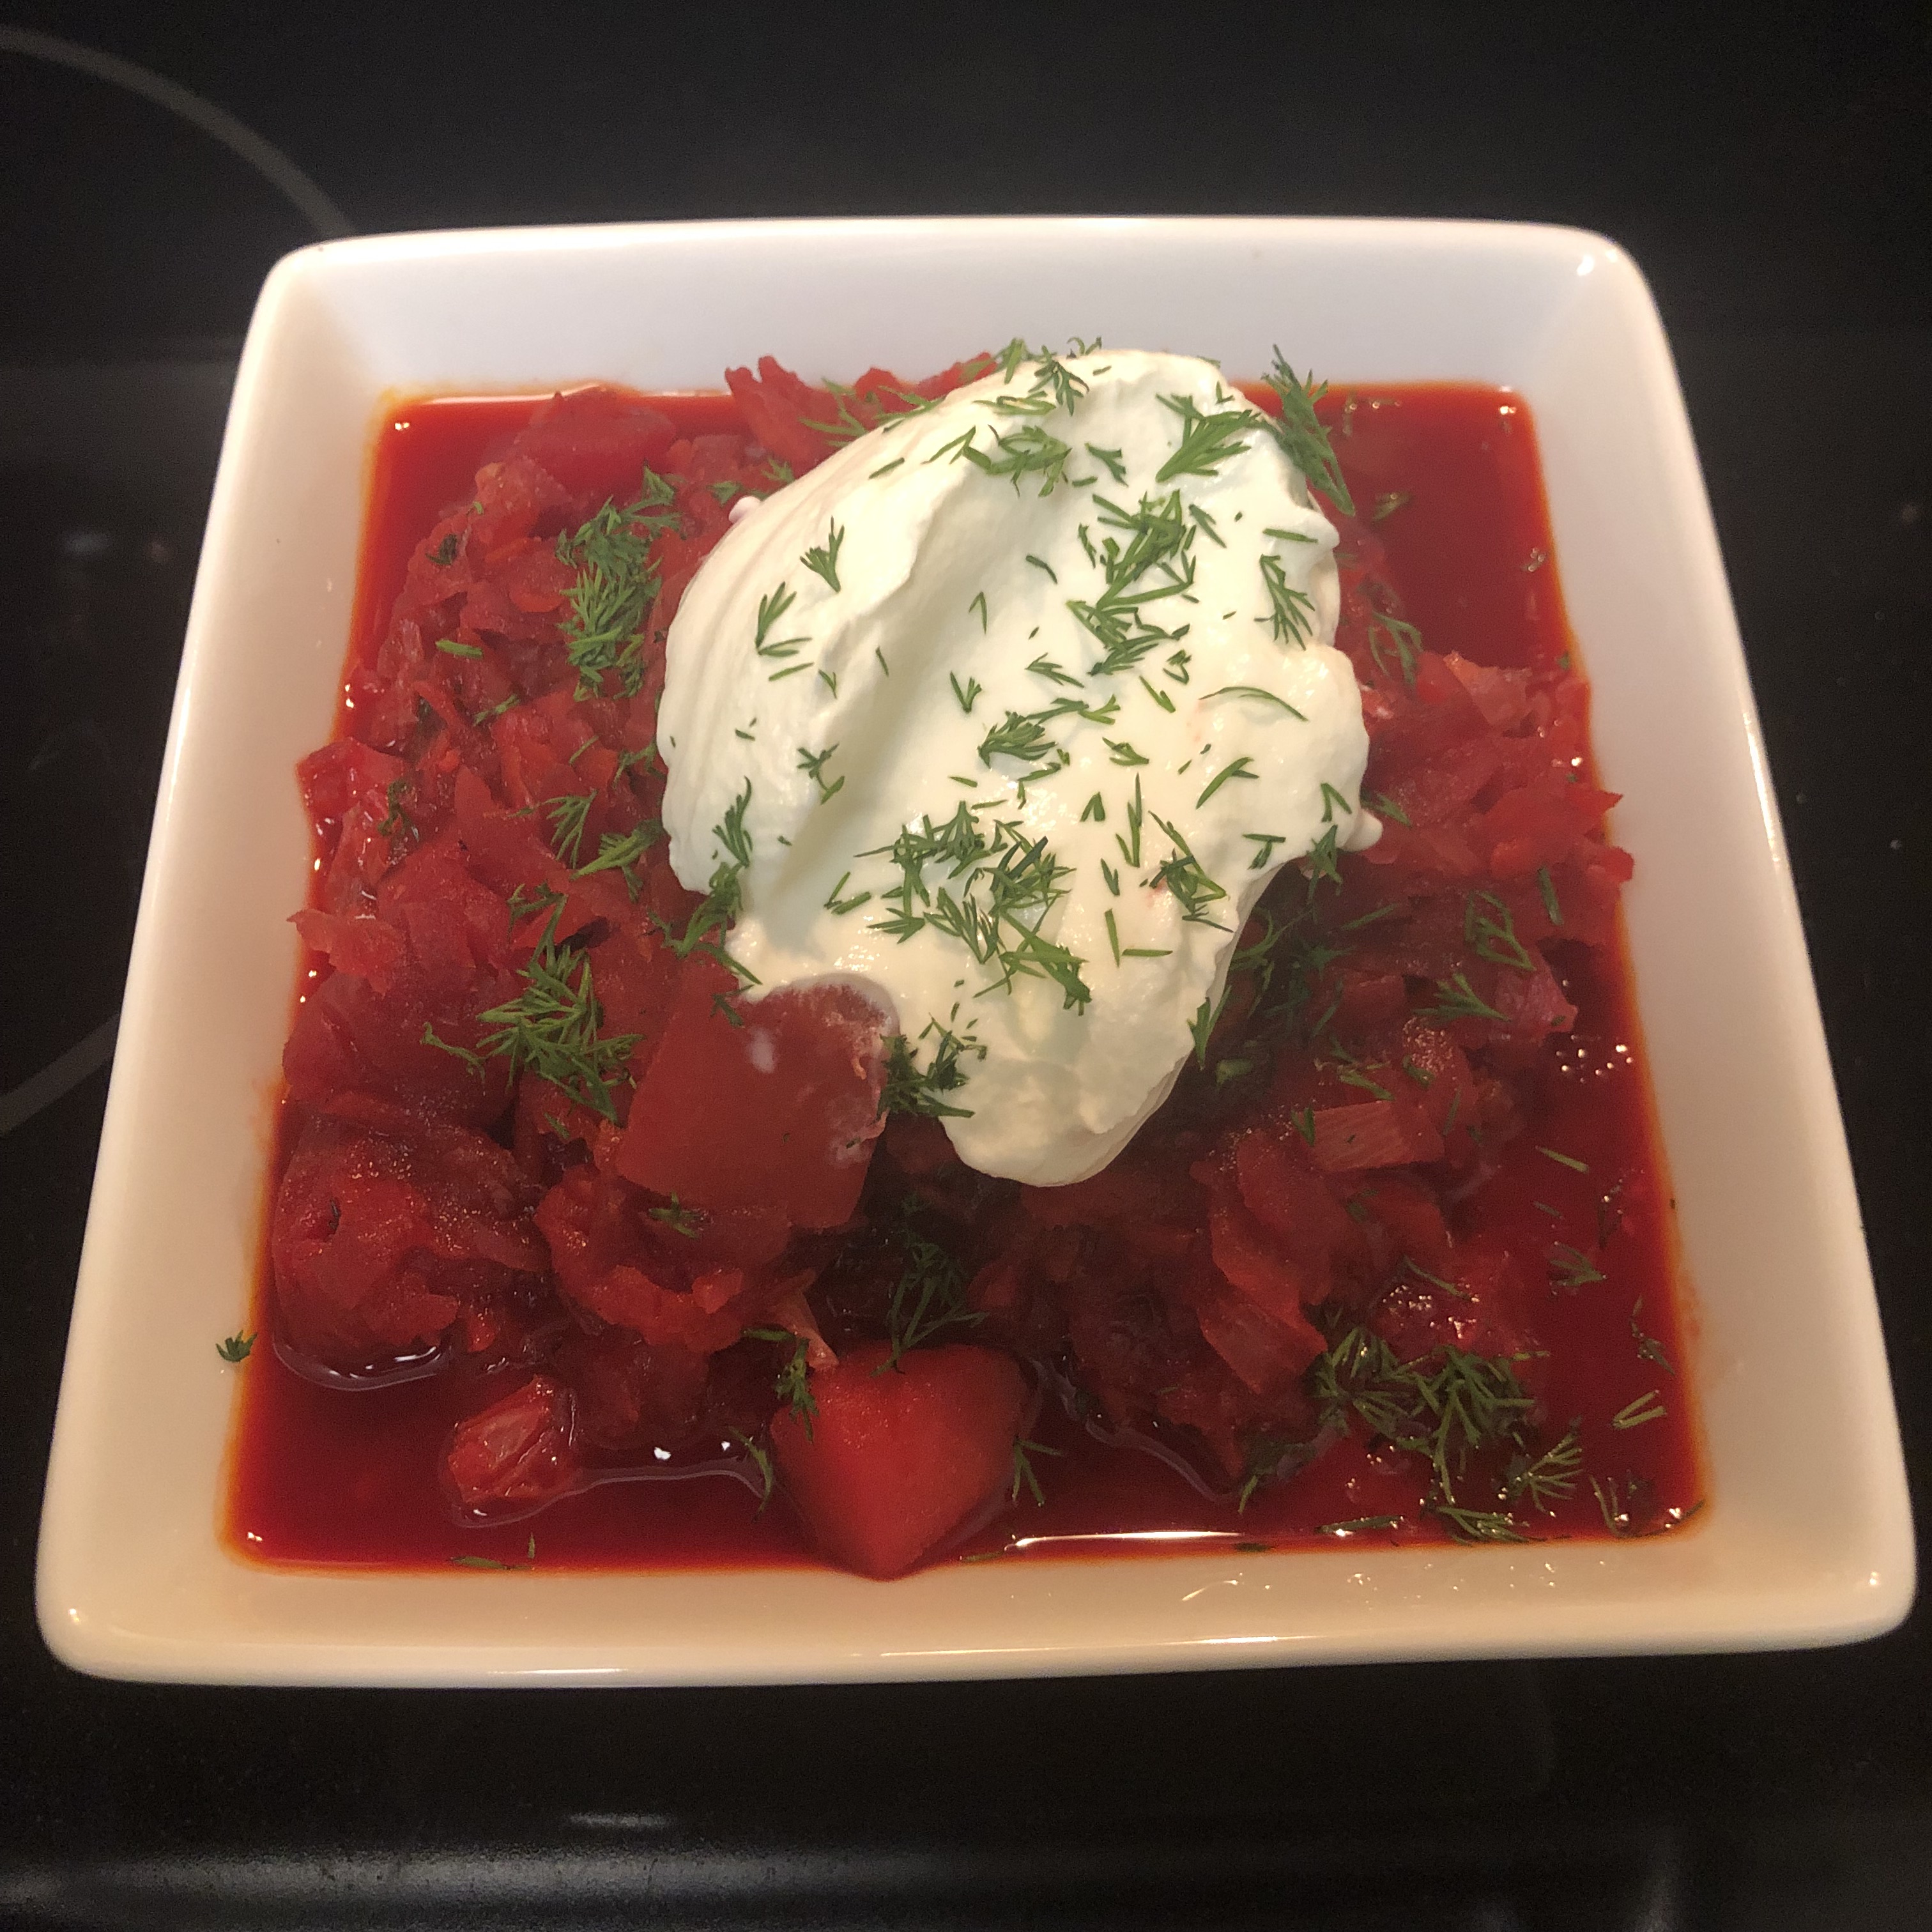 Finished bowl of Borscht, garnished with sour cream and dill